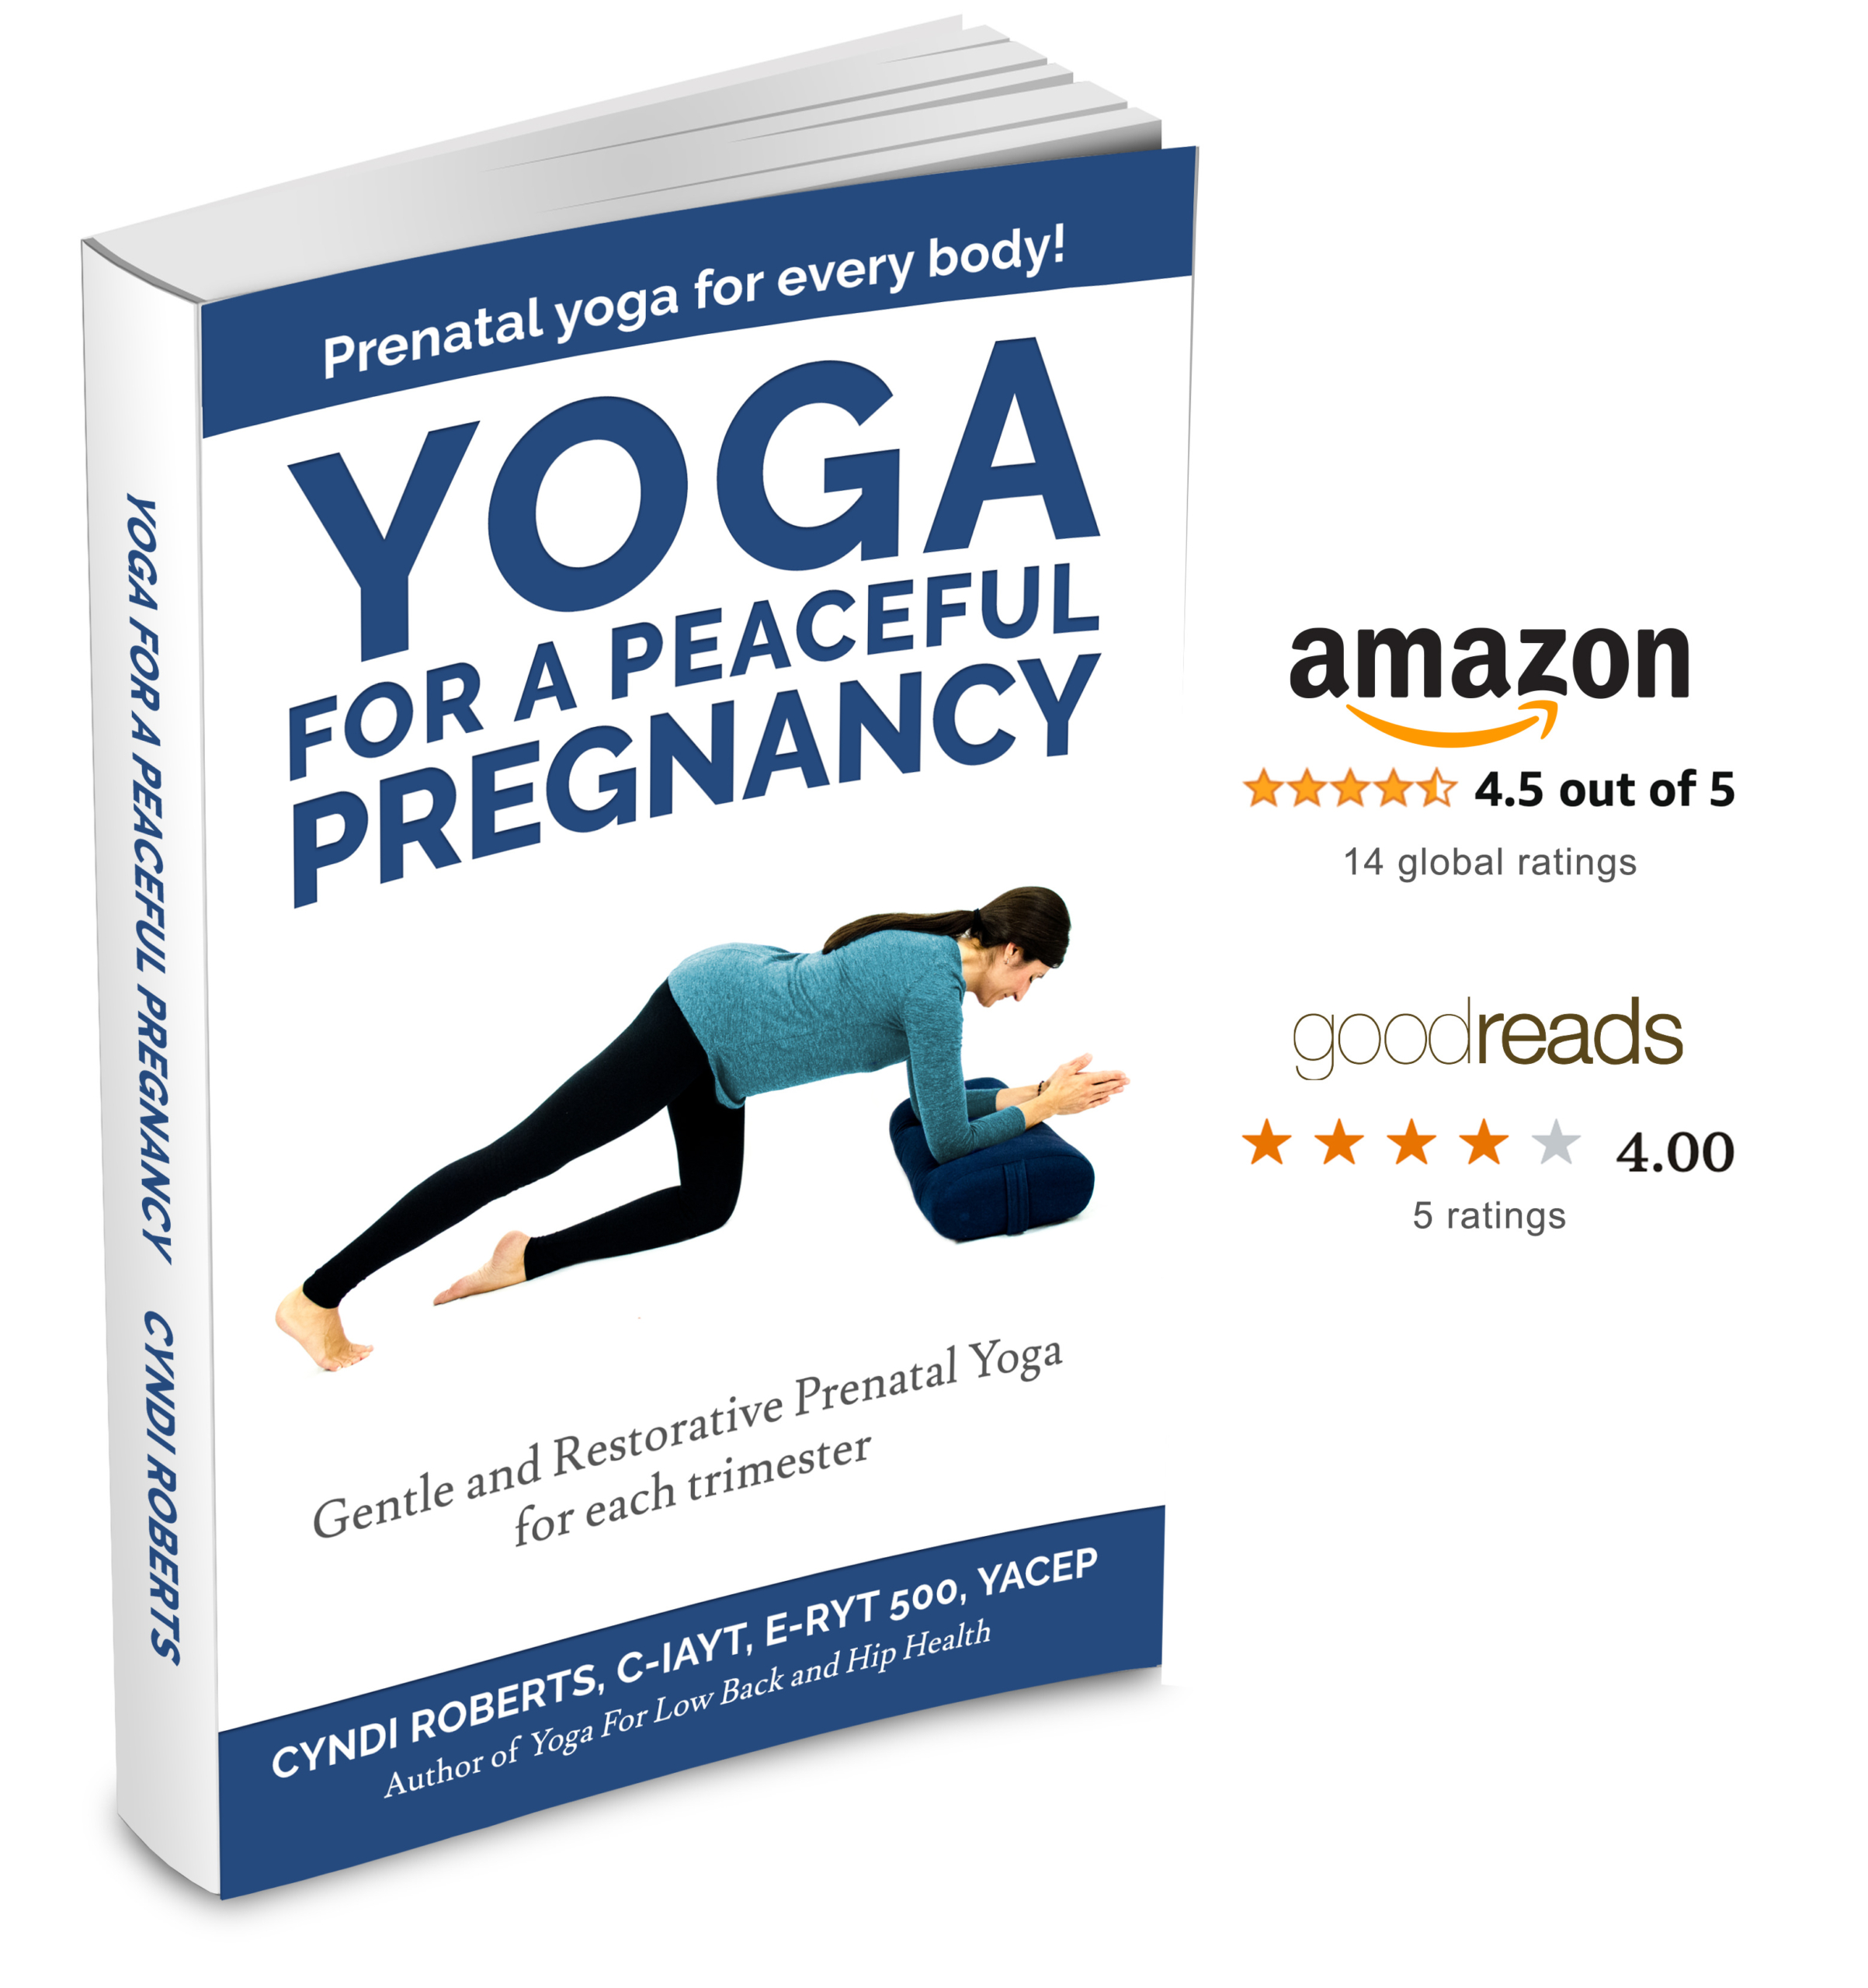 Yoga for a Peaceful Pregnancy reviews - instructional yoga book by Cyndi Roberts